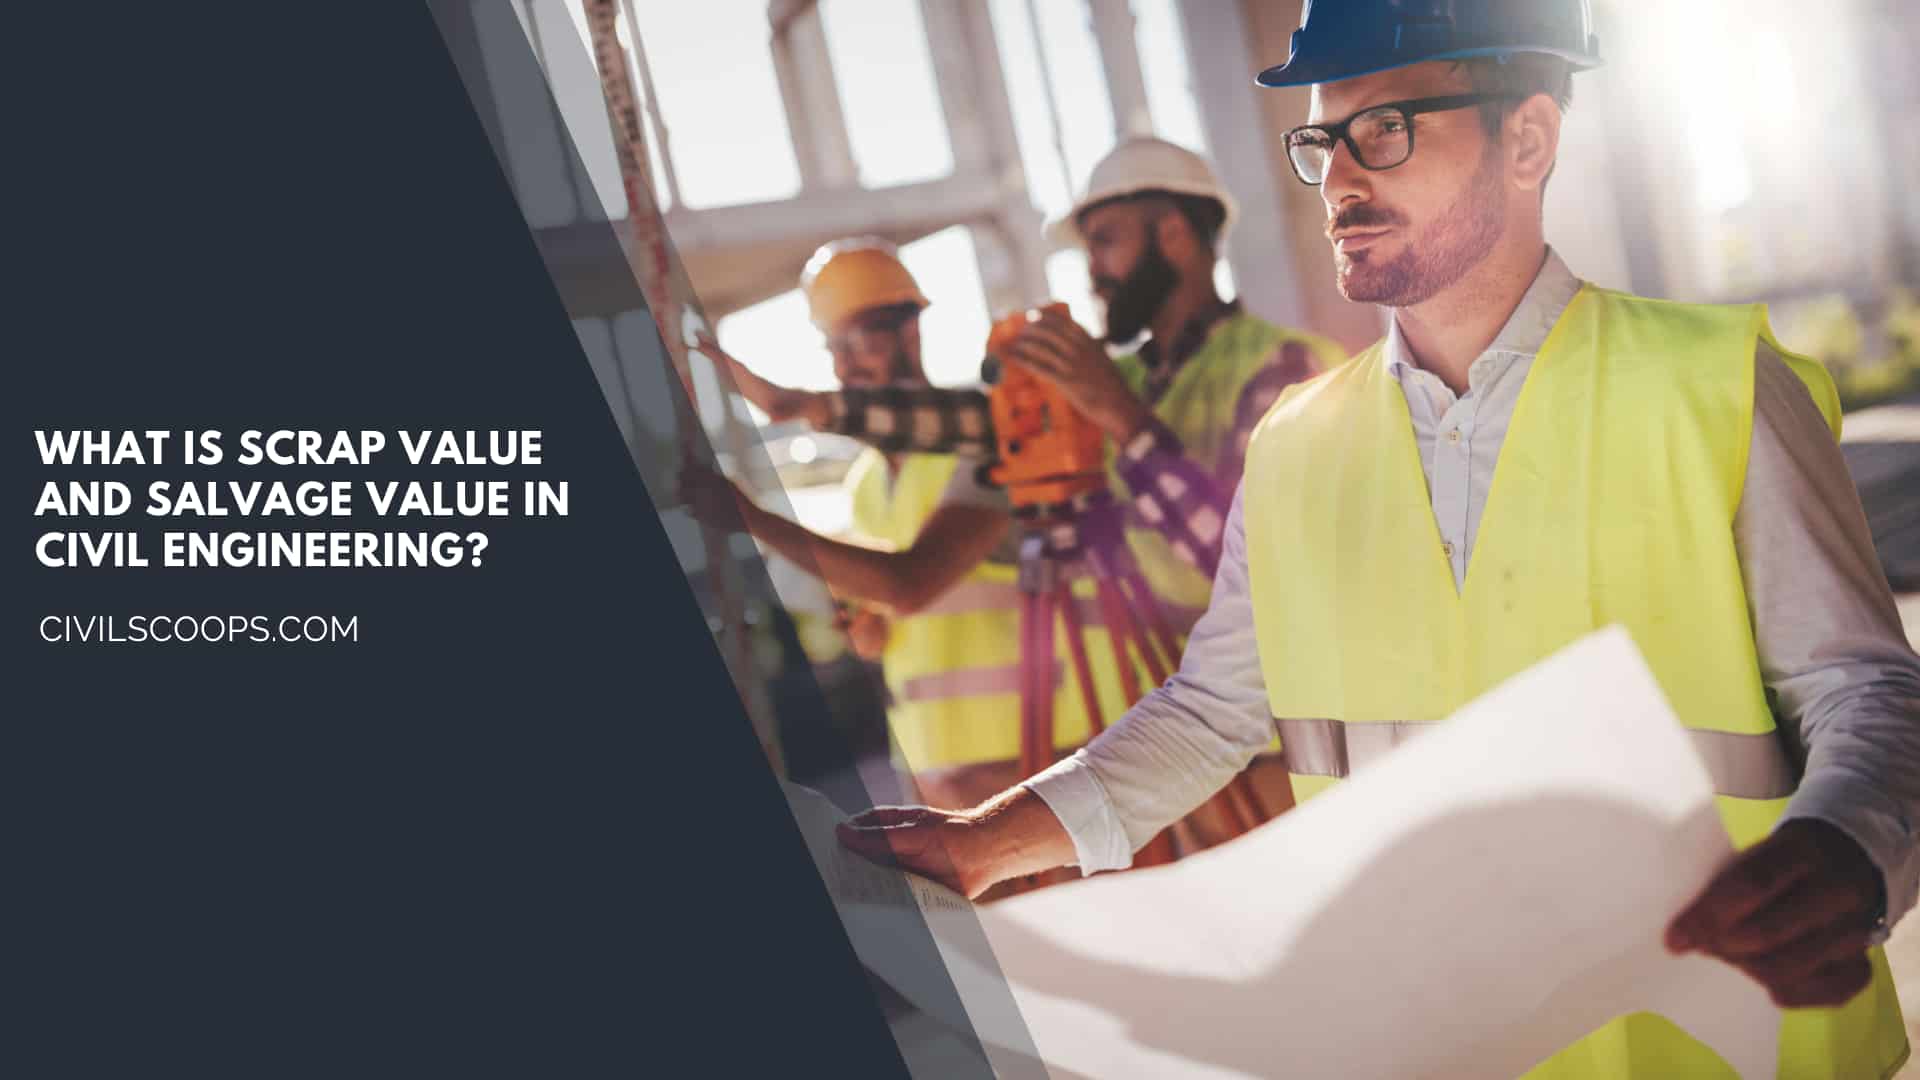 What Is Scrap Value and Salvage Value in Civil Engineering?